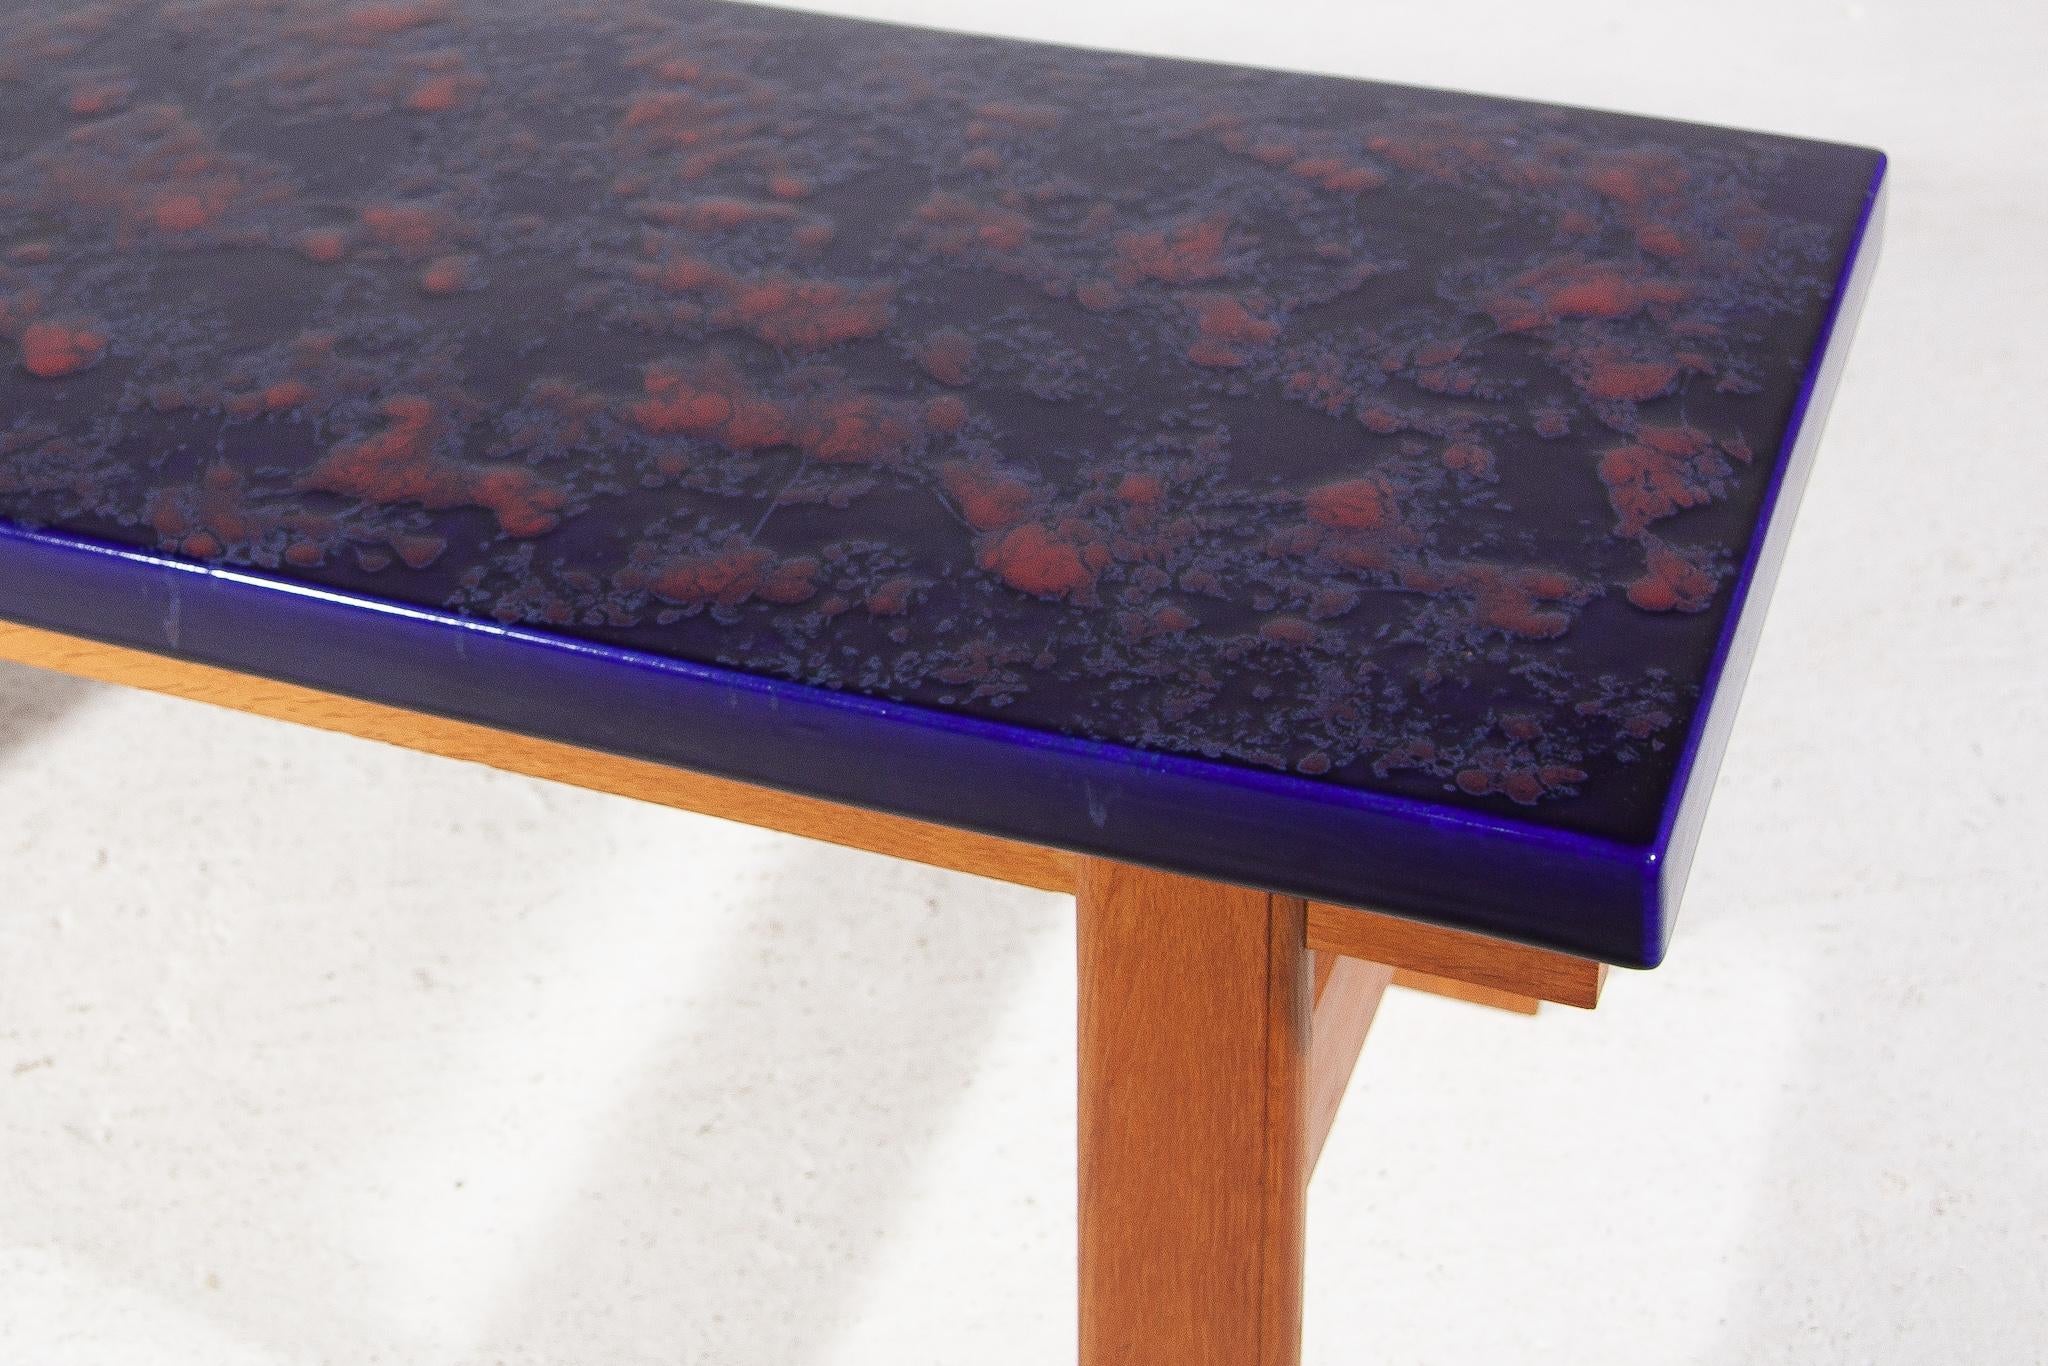 Rare seventies original large coffee table or end table, consists of a large ceramic top tile glazed in bright blue with accents contrast of orange spots make the table a warm, beautiful object in your interior. The base is in solid oak.